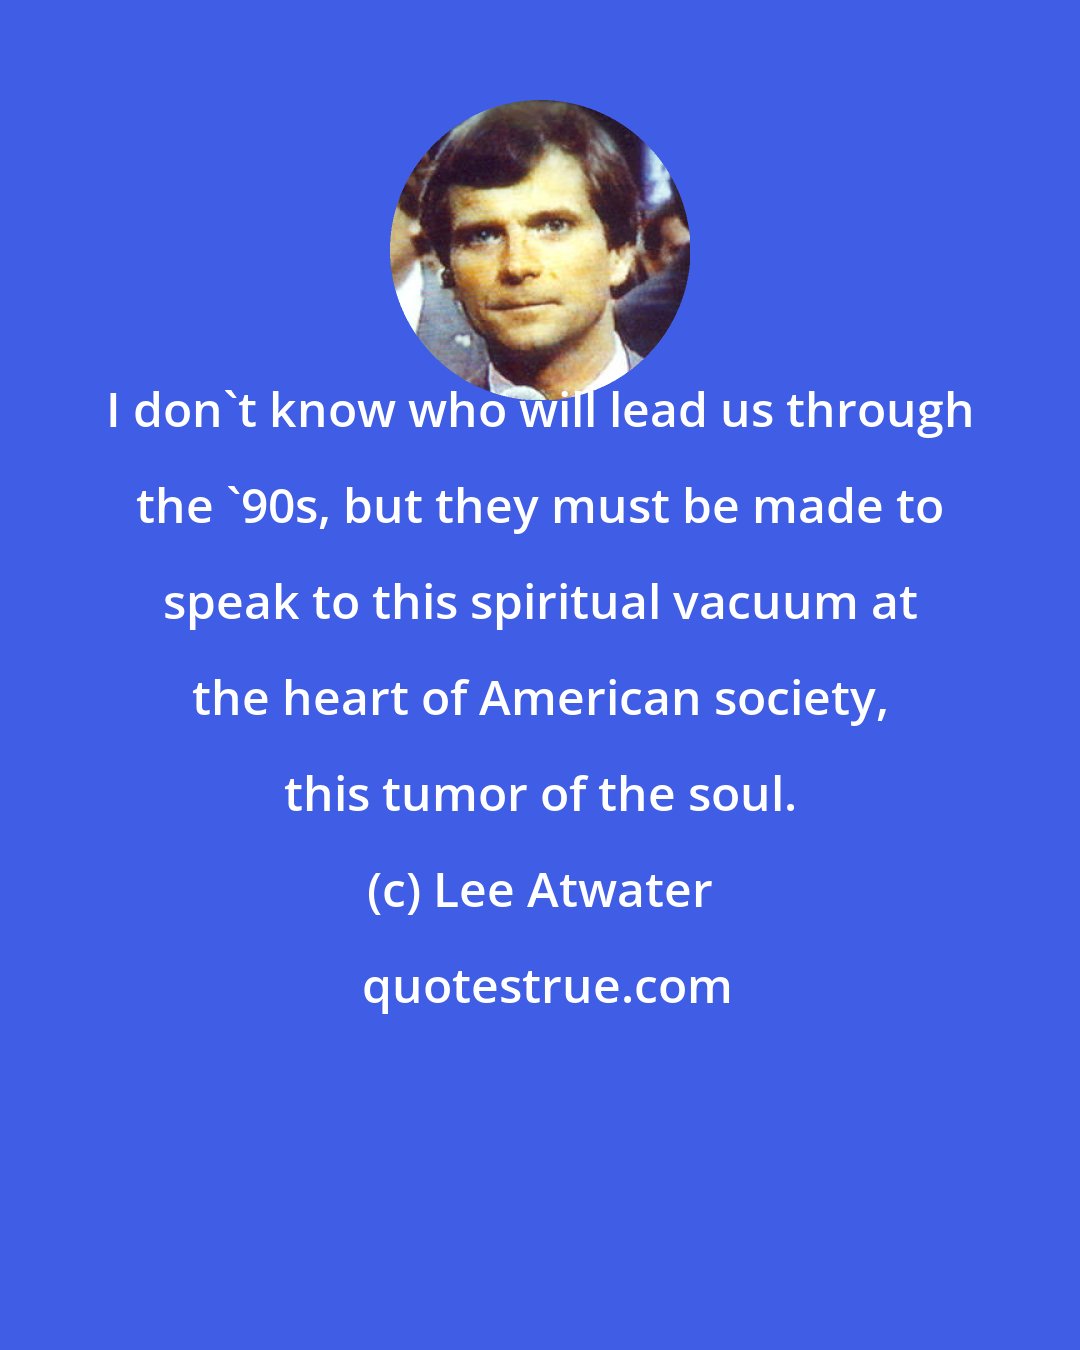 Lee Atwater: I don't know who will lead us through the '90s, but they must be made to speak to this spiritual vacuum at the heart of American society, this tumor of the soul.